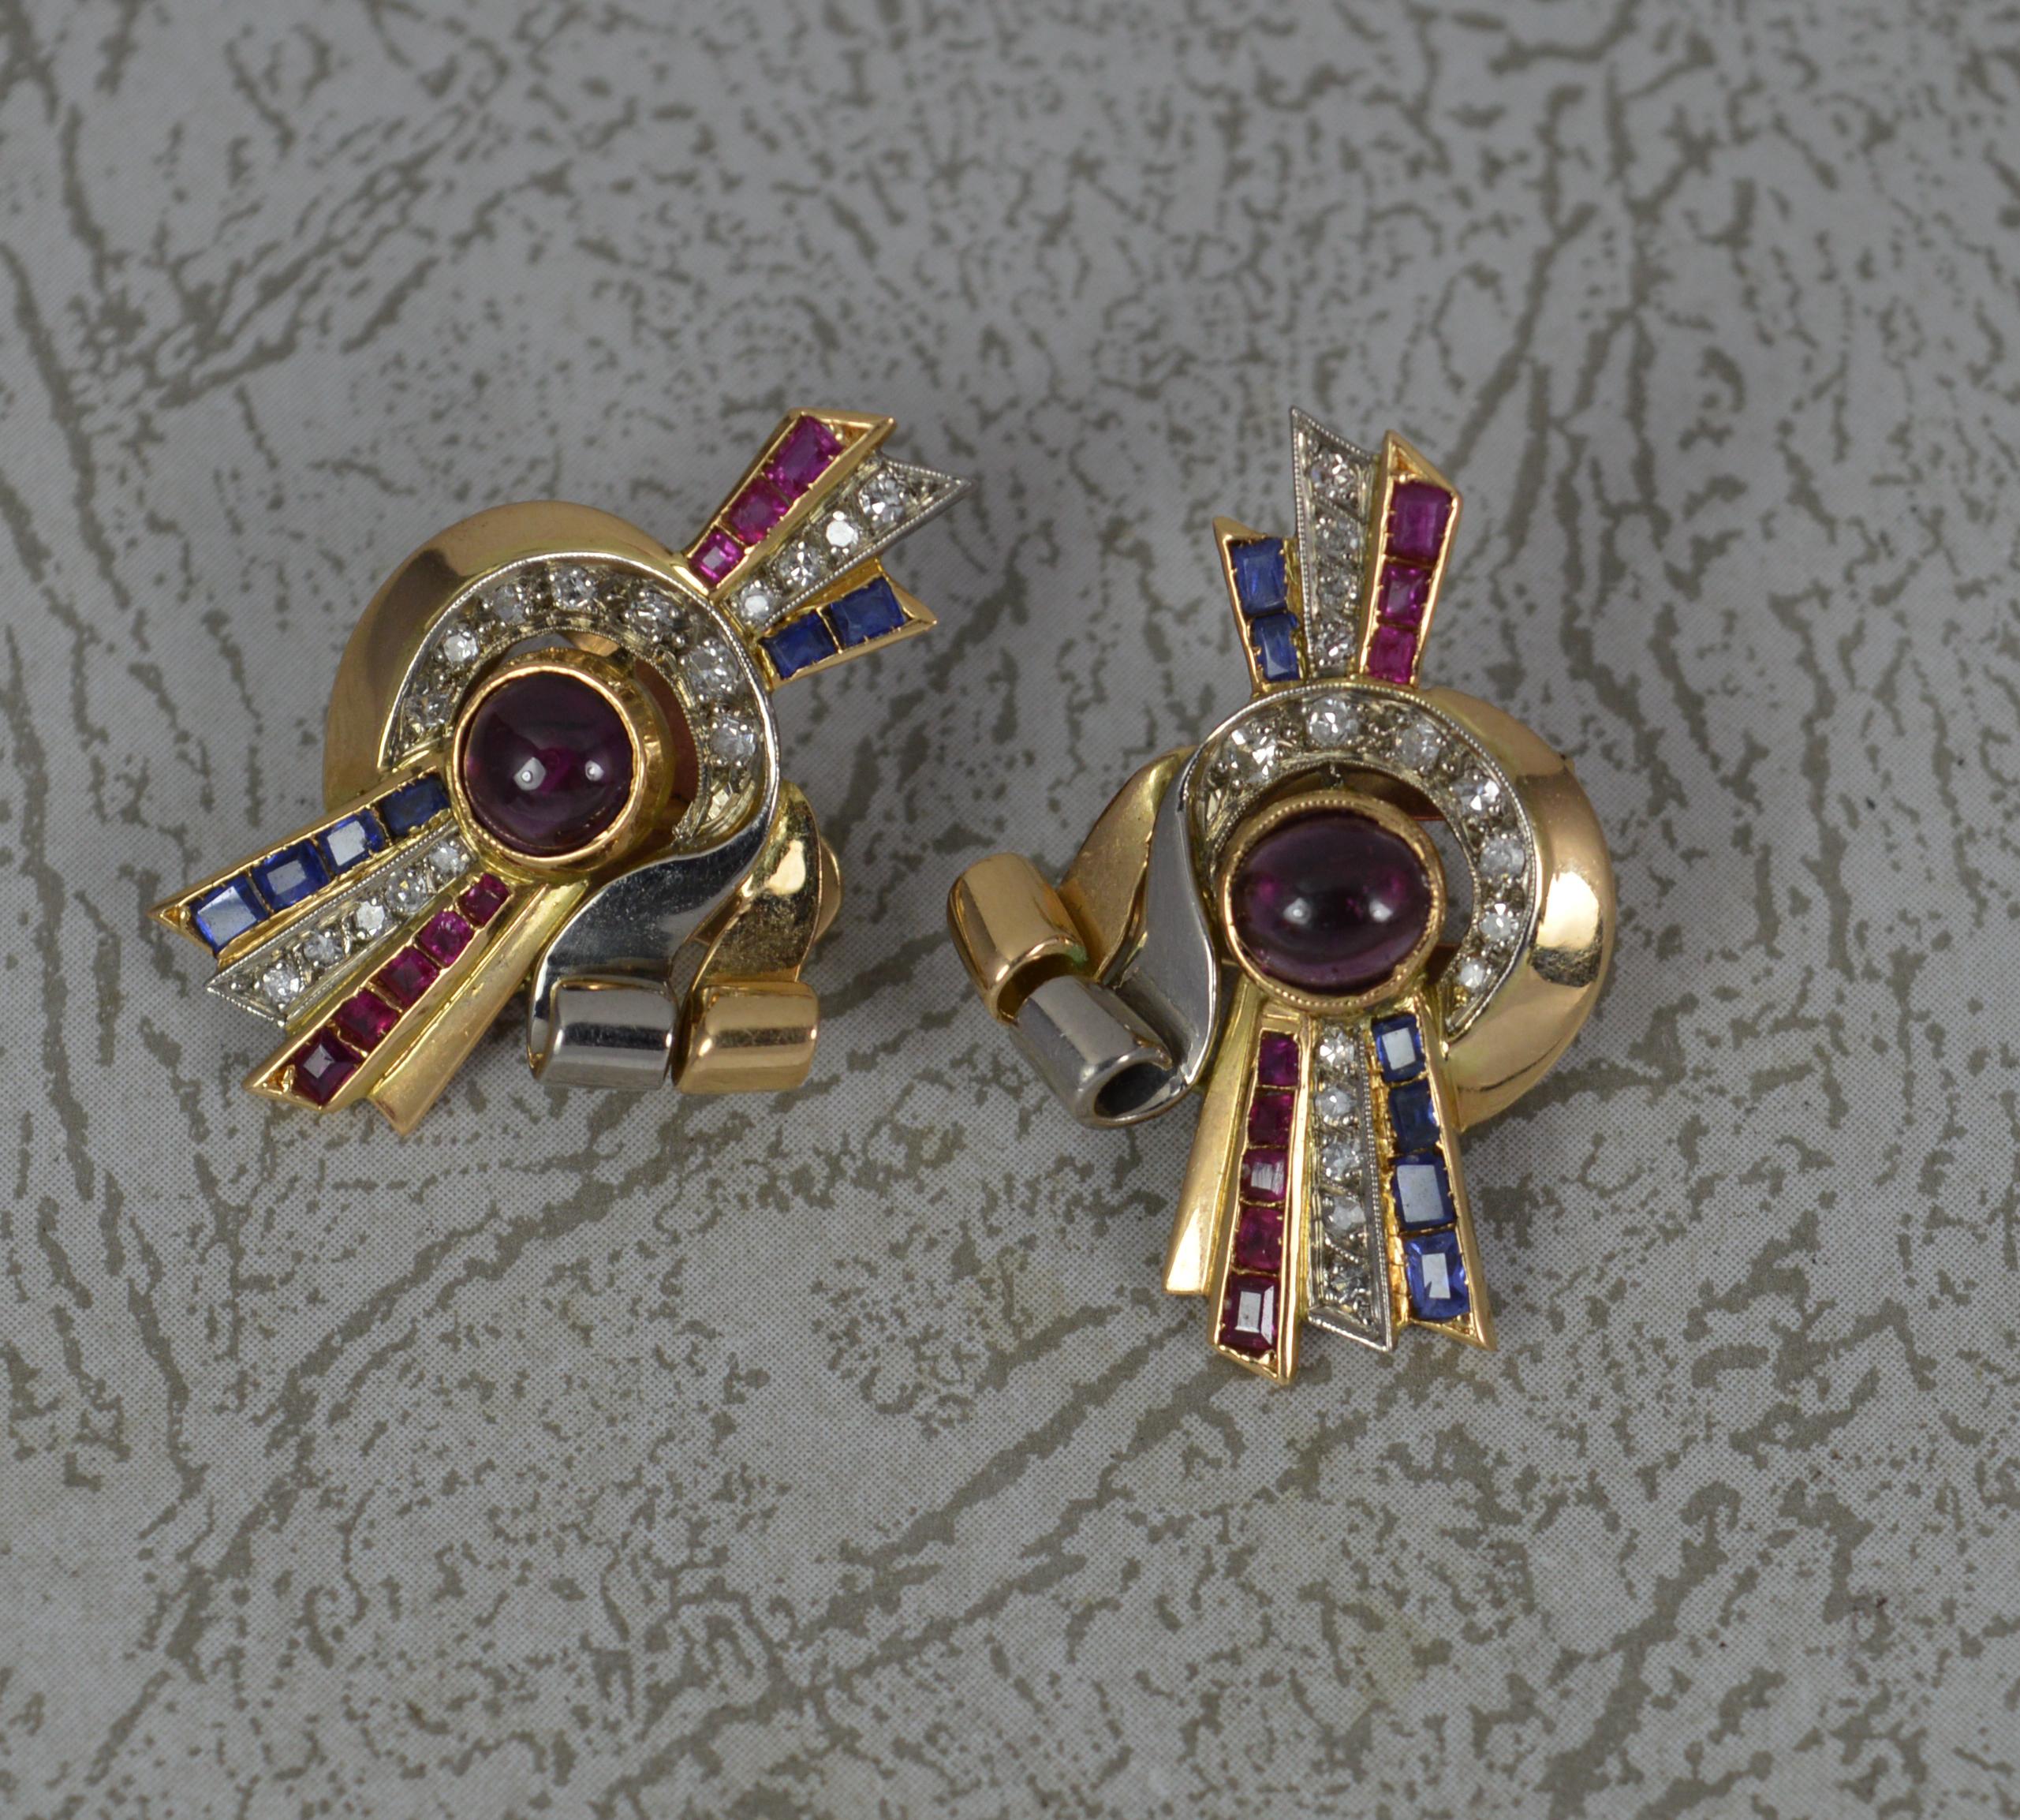 A superb pair of Art Deco period earrings, circa 1920.
Designed in 18 carat gold and platinum front sections.
A highly stylish design. The centre with a round ruby cabochon to centre in full bezel setting. To the sides are many princess cut blue